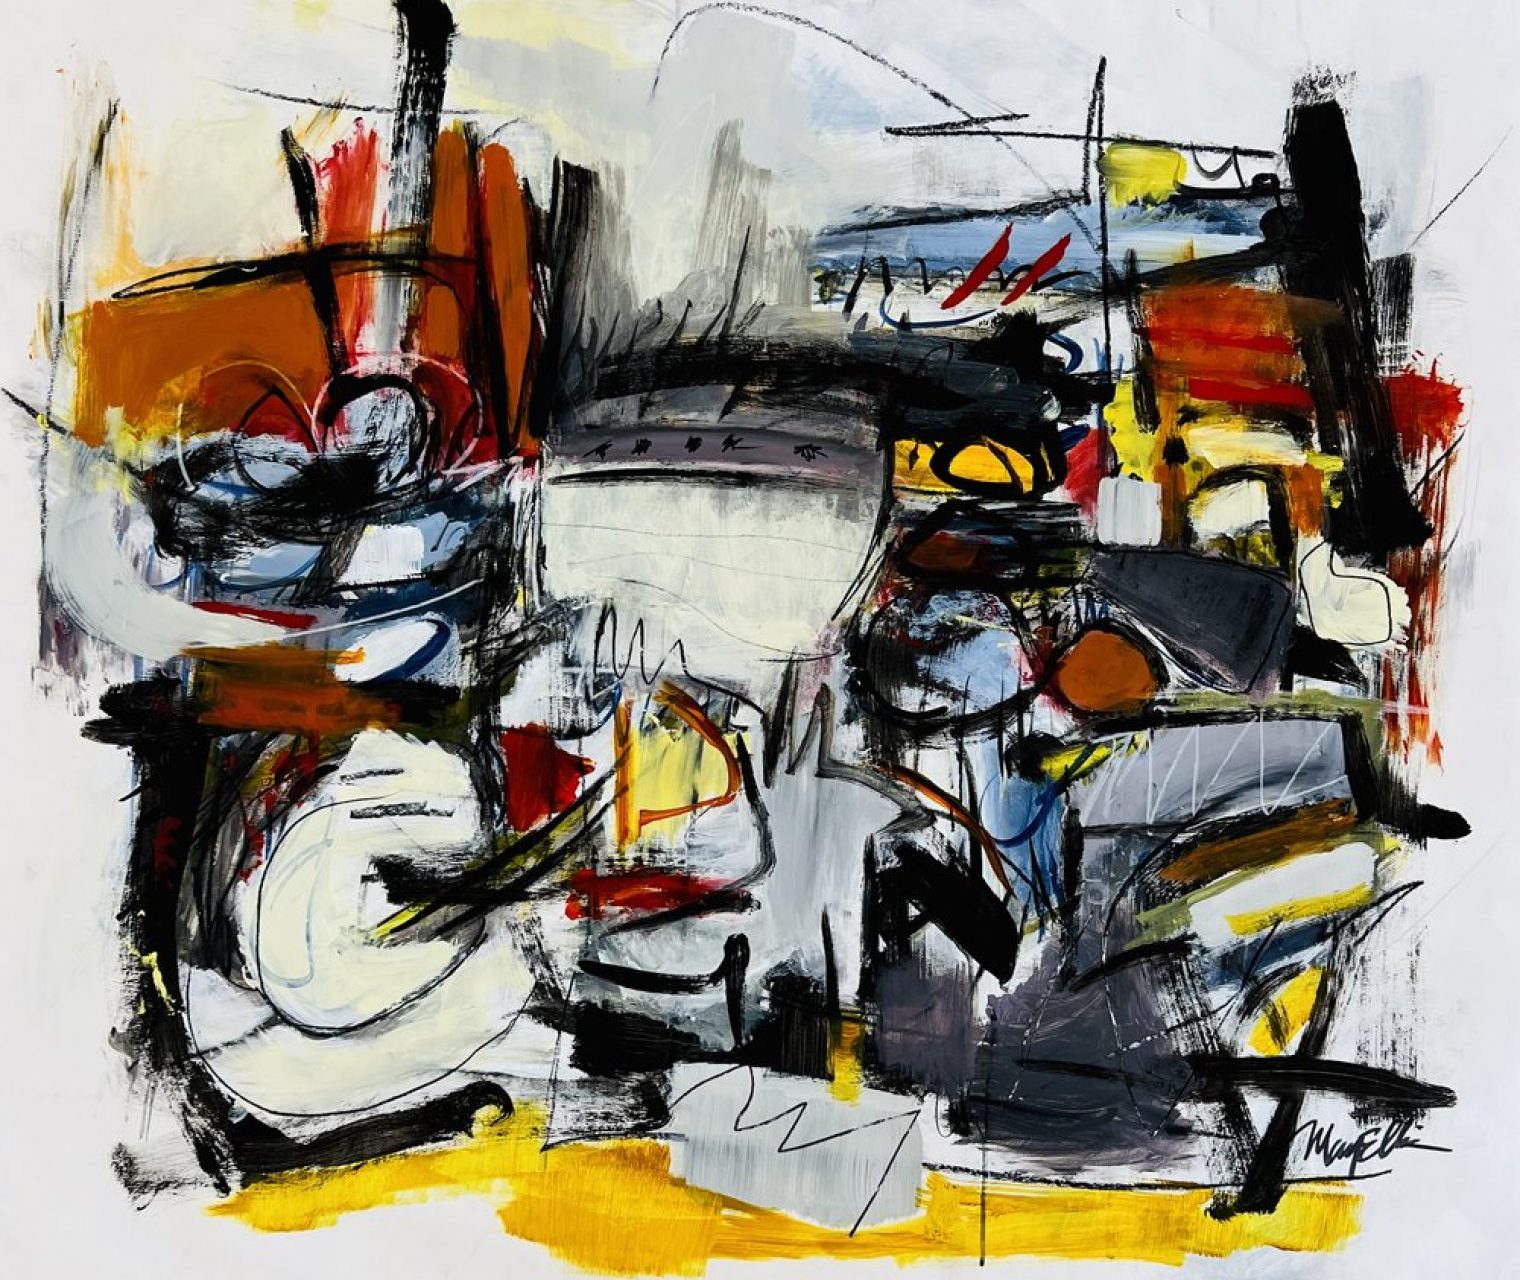 Home Confinement_46x40 _Acrylic on_paper (1)